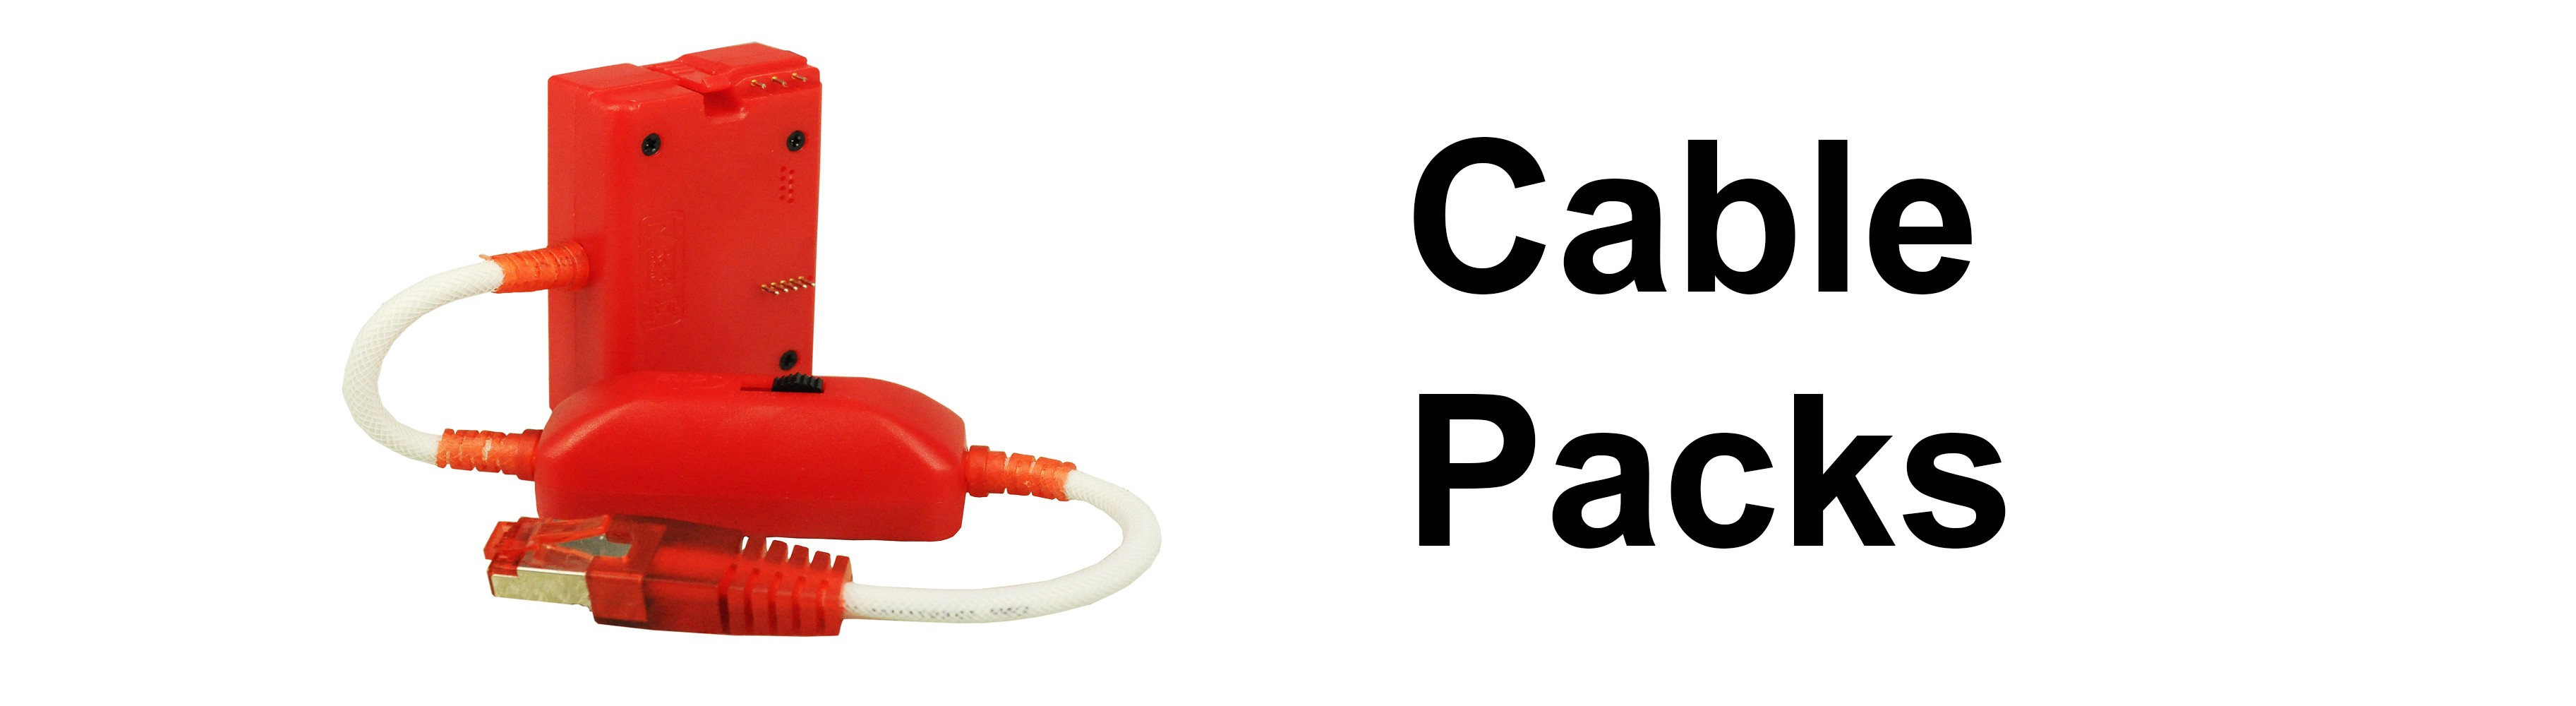 Service Cable For Cable Packs